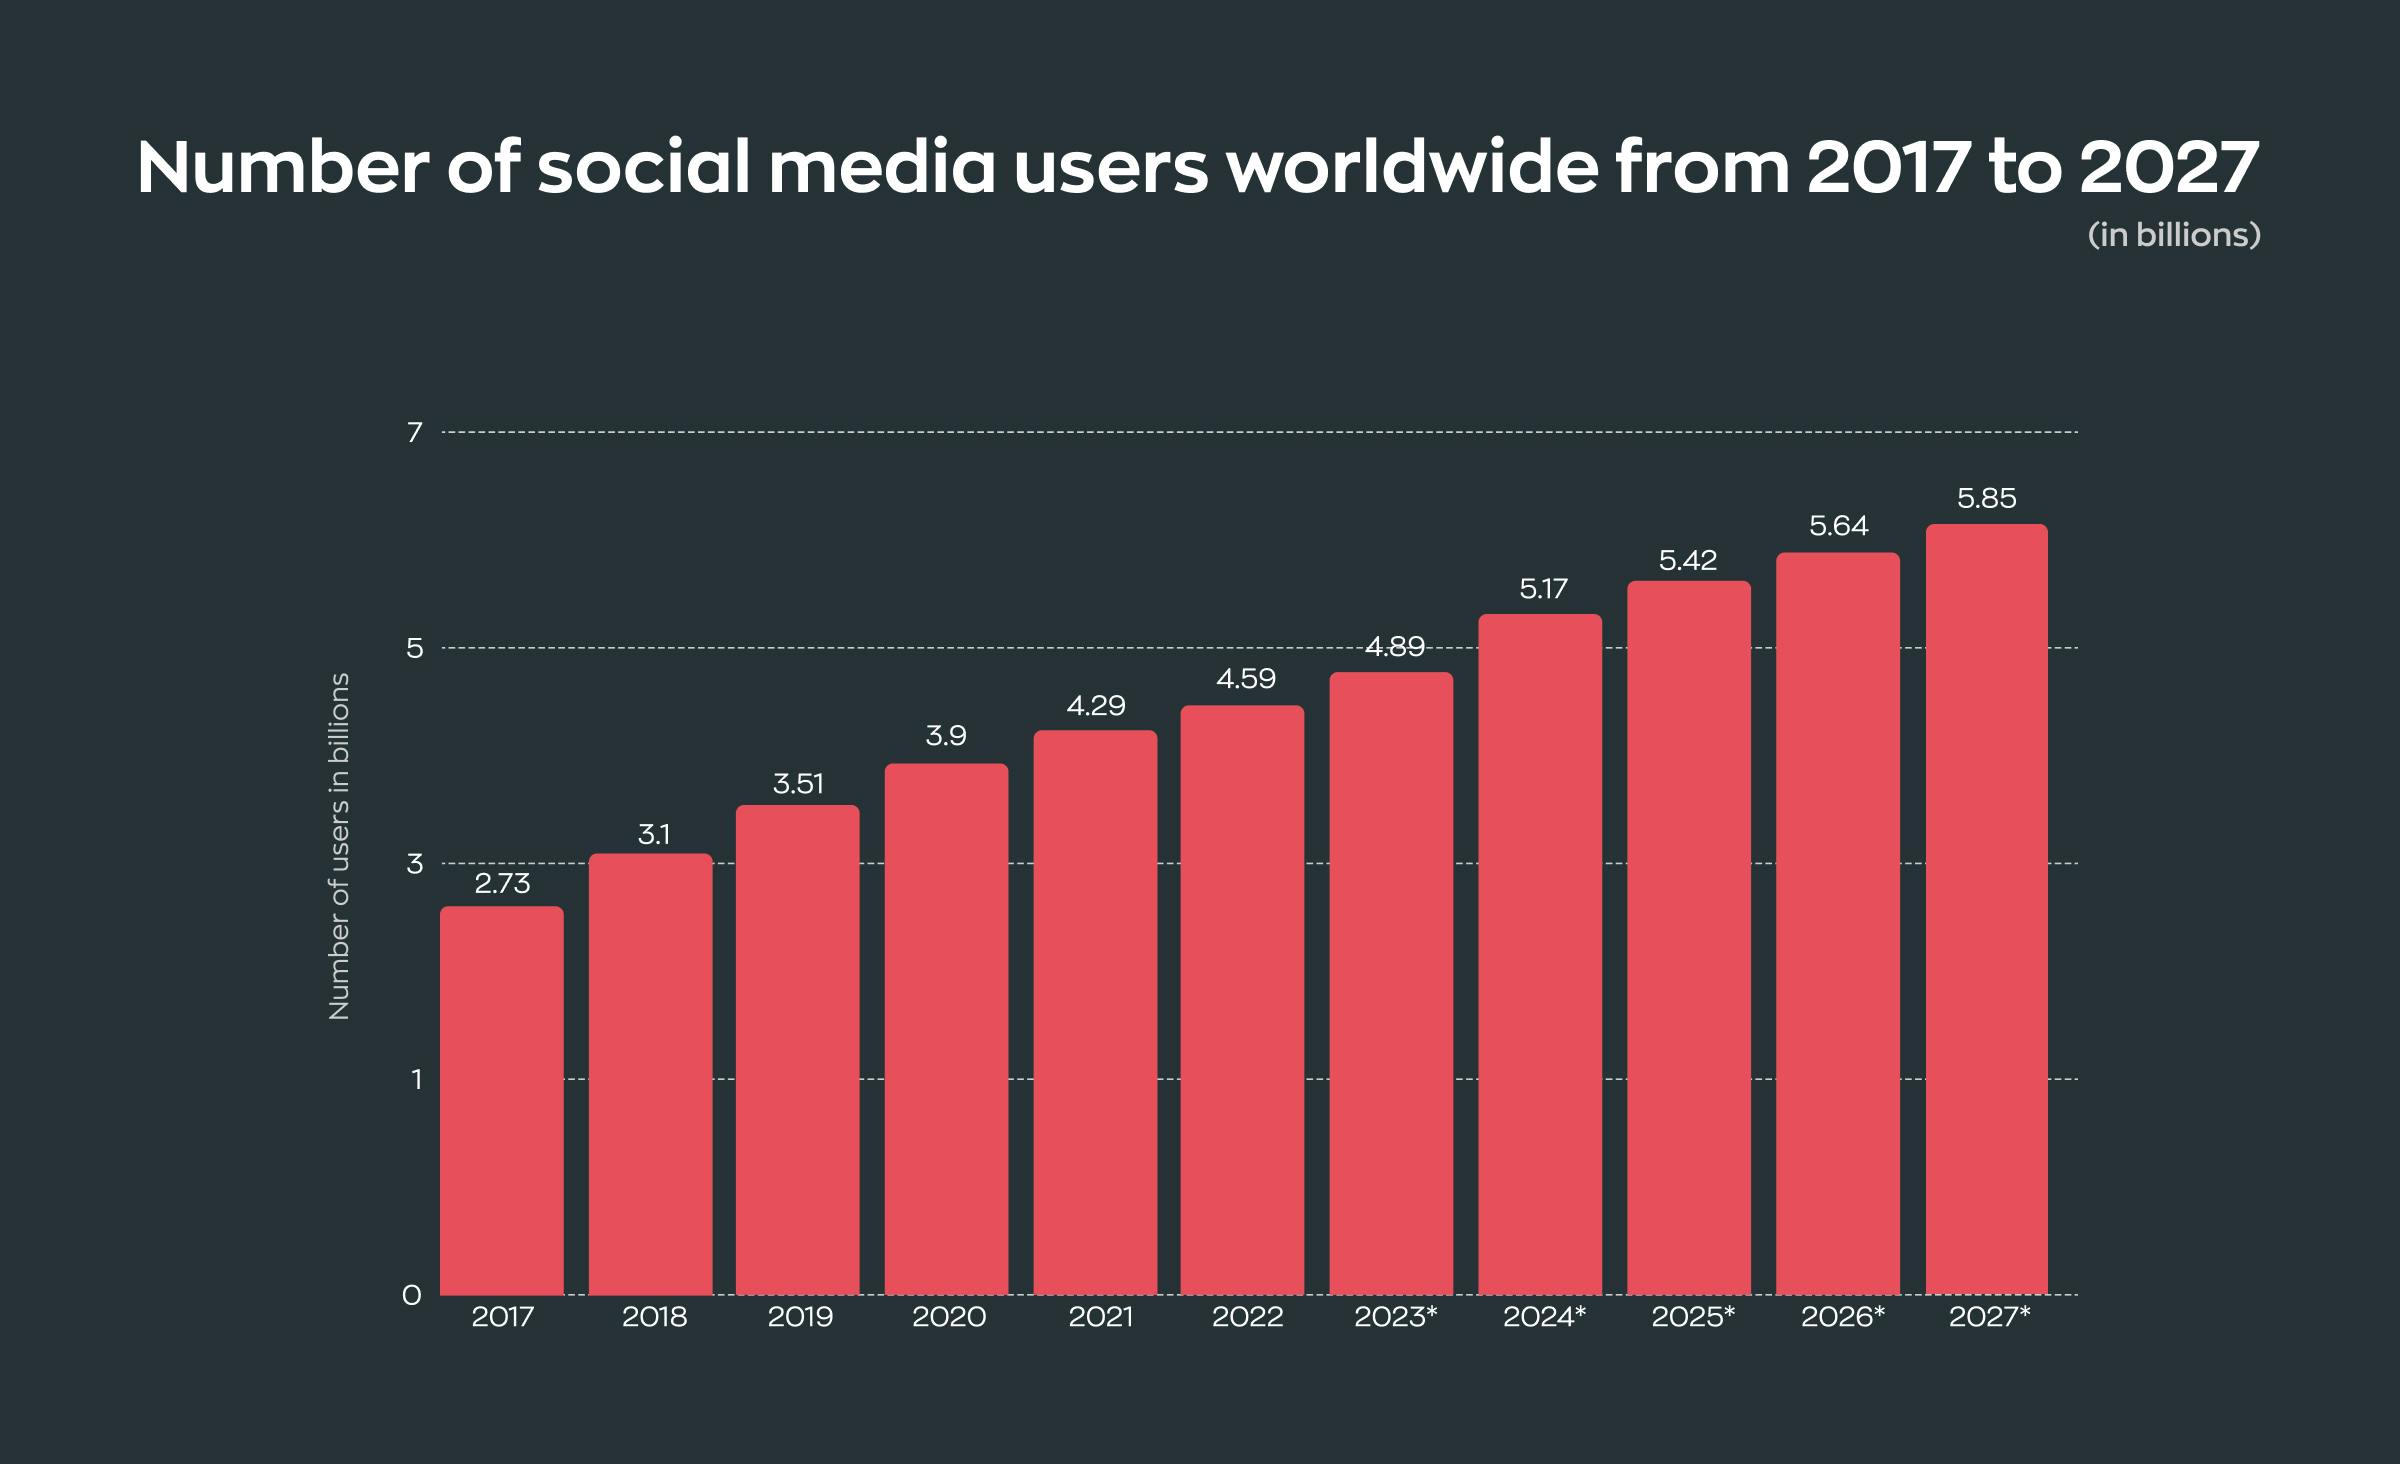 The global number of social media users grows every year which is a great reason to build a social media website